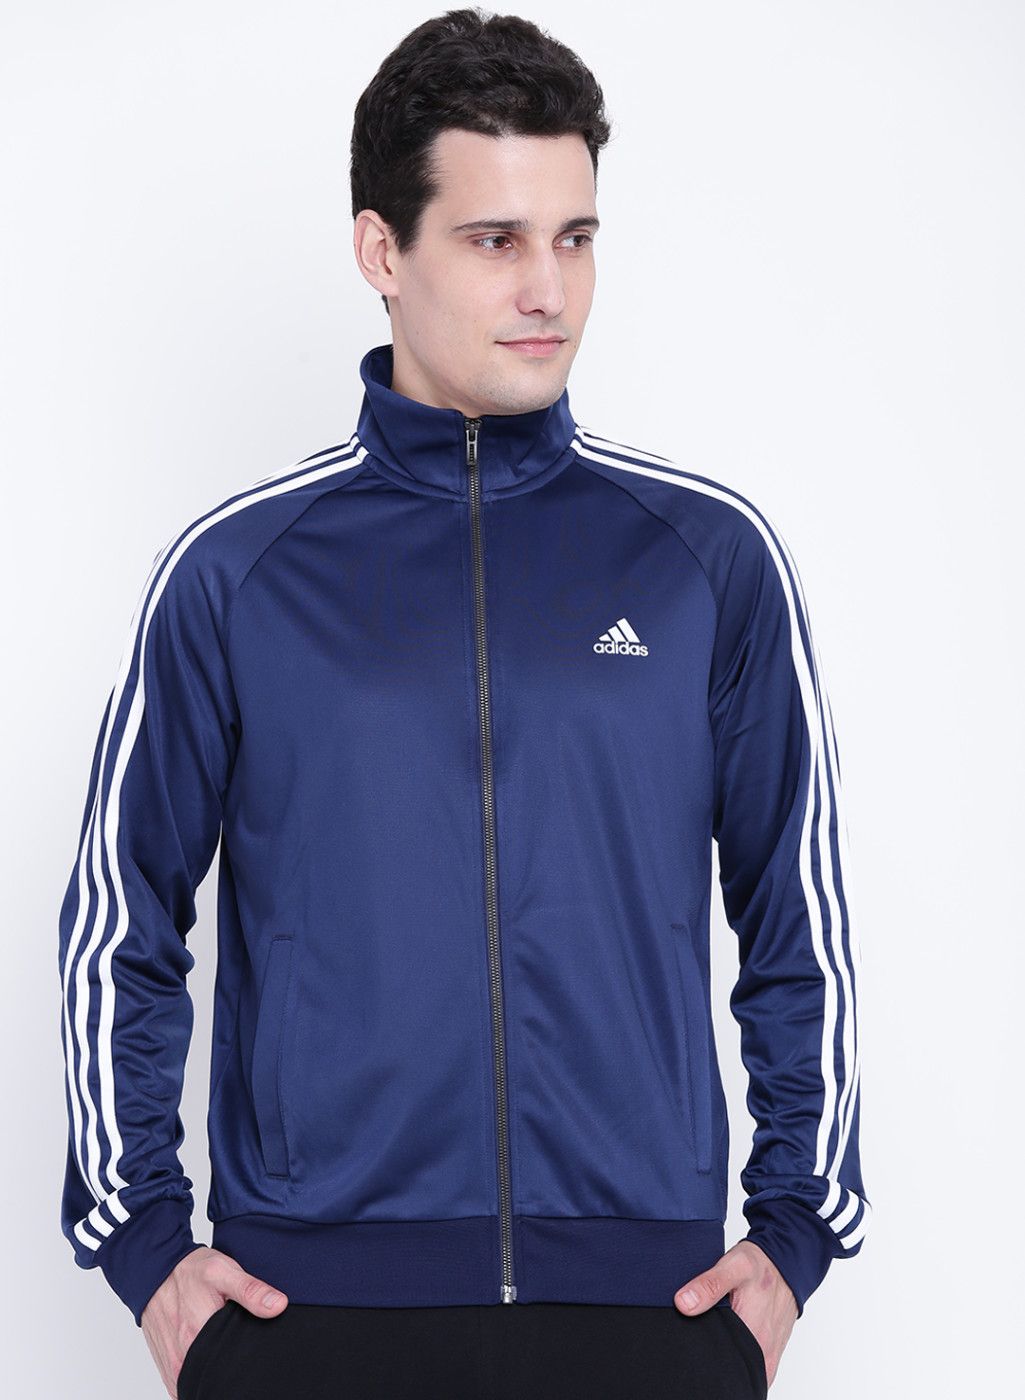 Adidas Jackets for Men - Buy Adidas Men Jackets Online in India ...